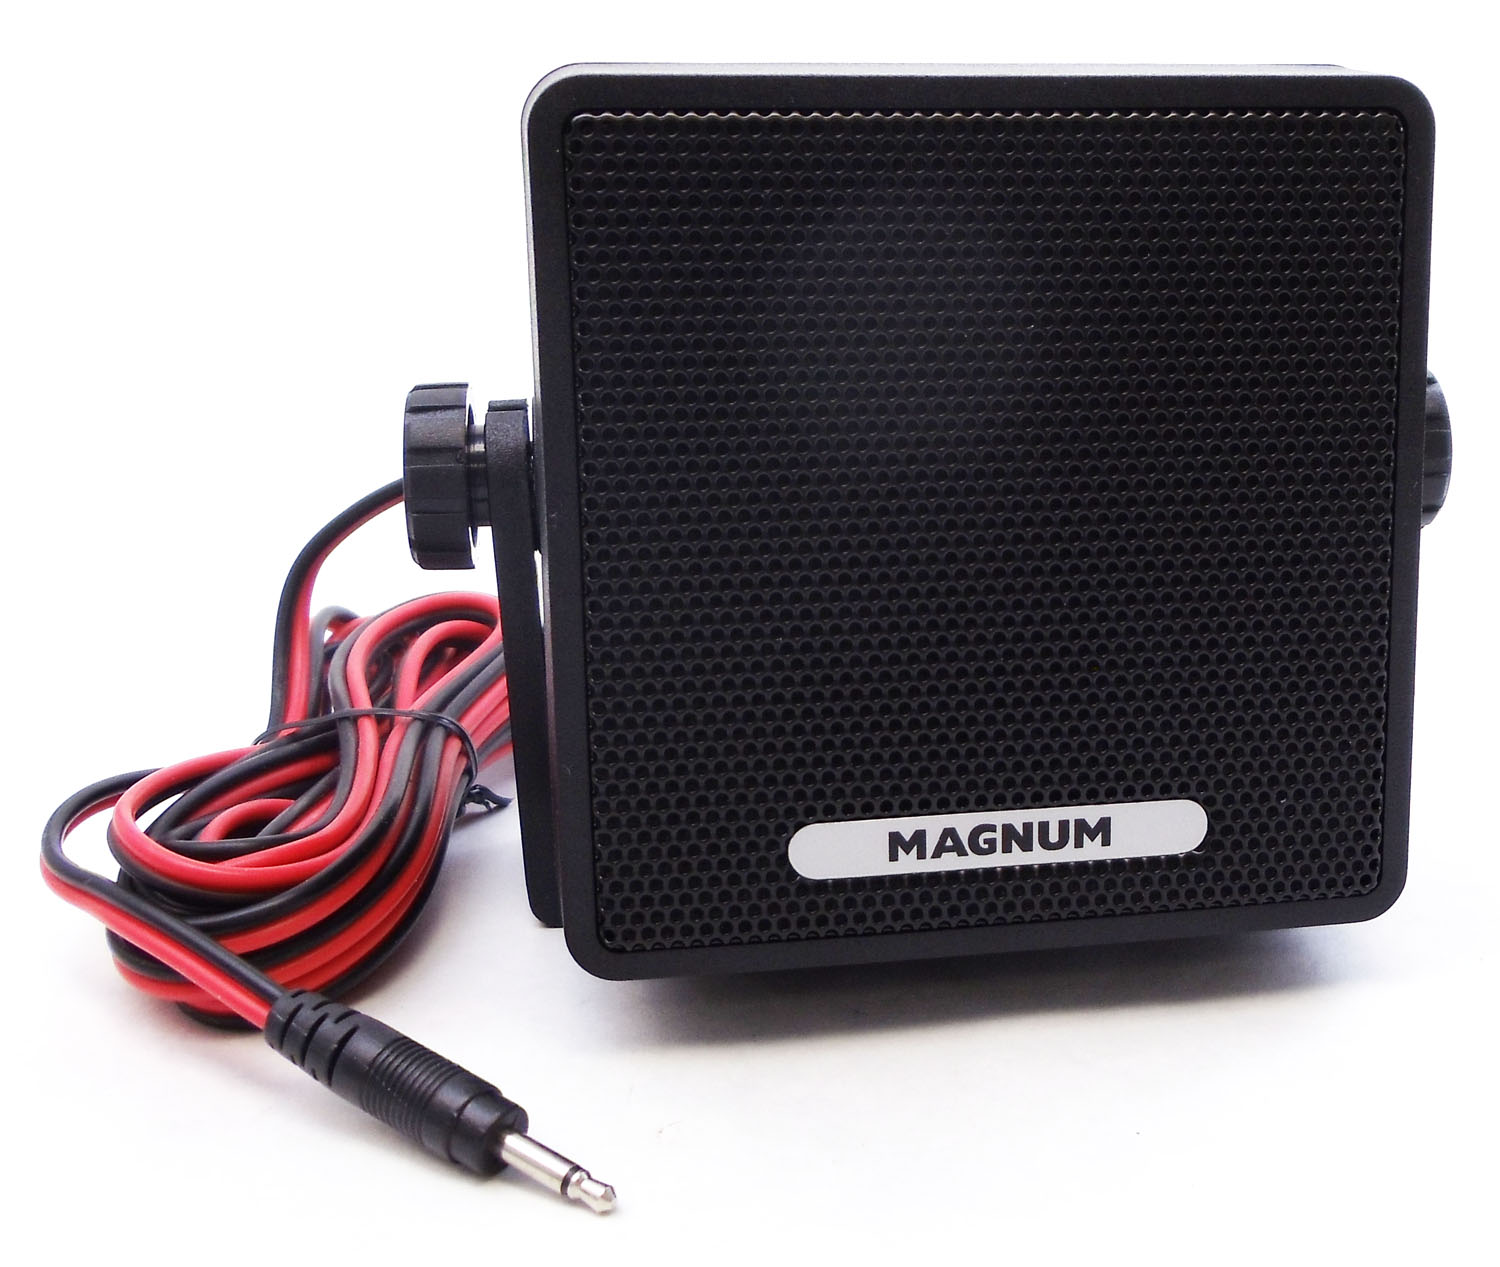 Magnum 12 Watt 8 Ohm Heavy Duty Extention Speaker With Cable & Plug